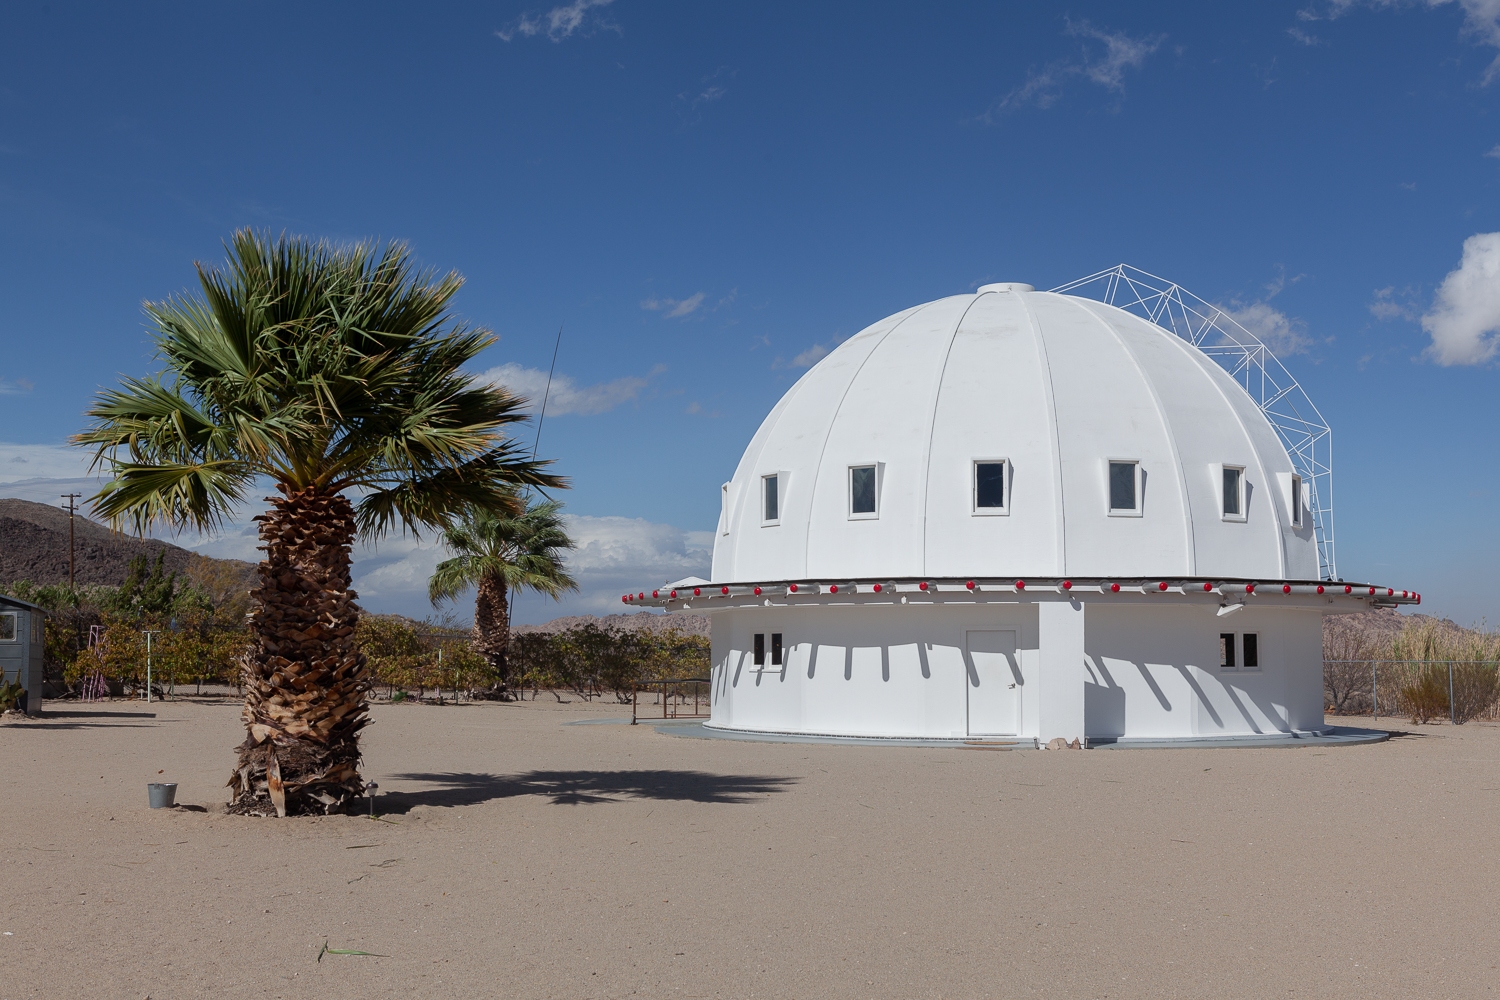 Joshua Tree – The Out of This World Integratron